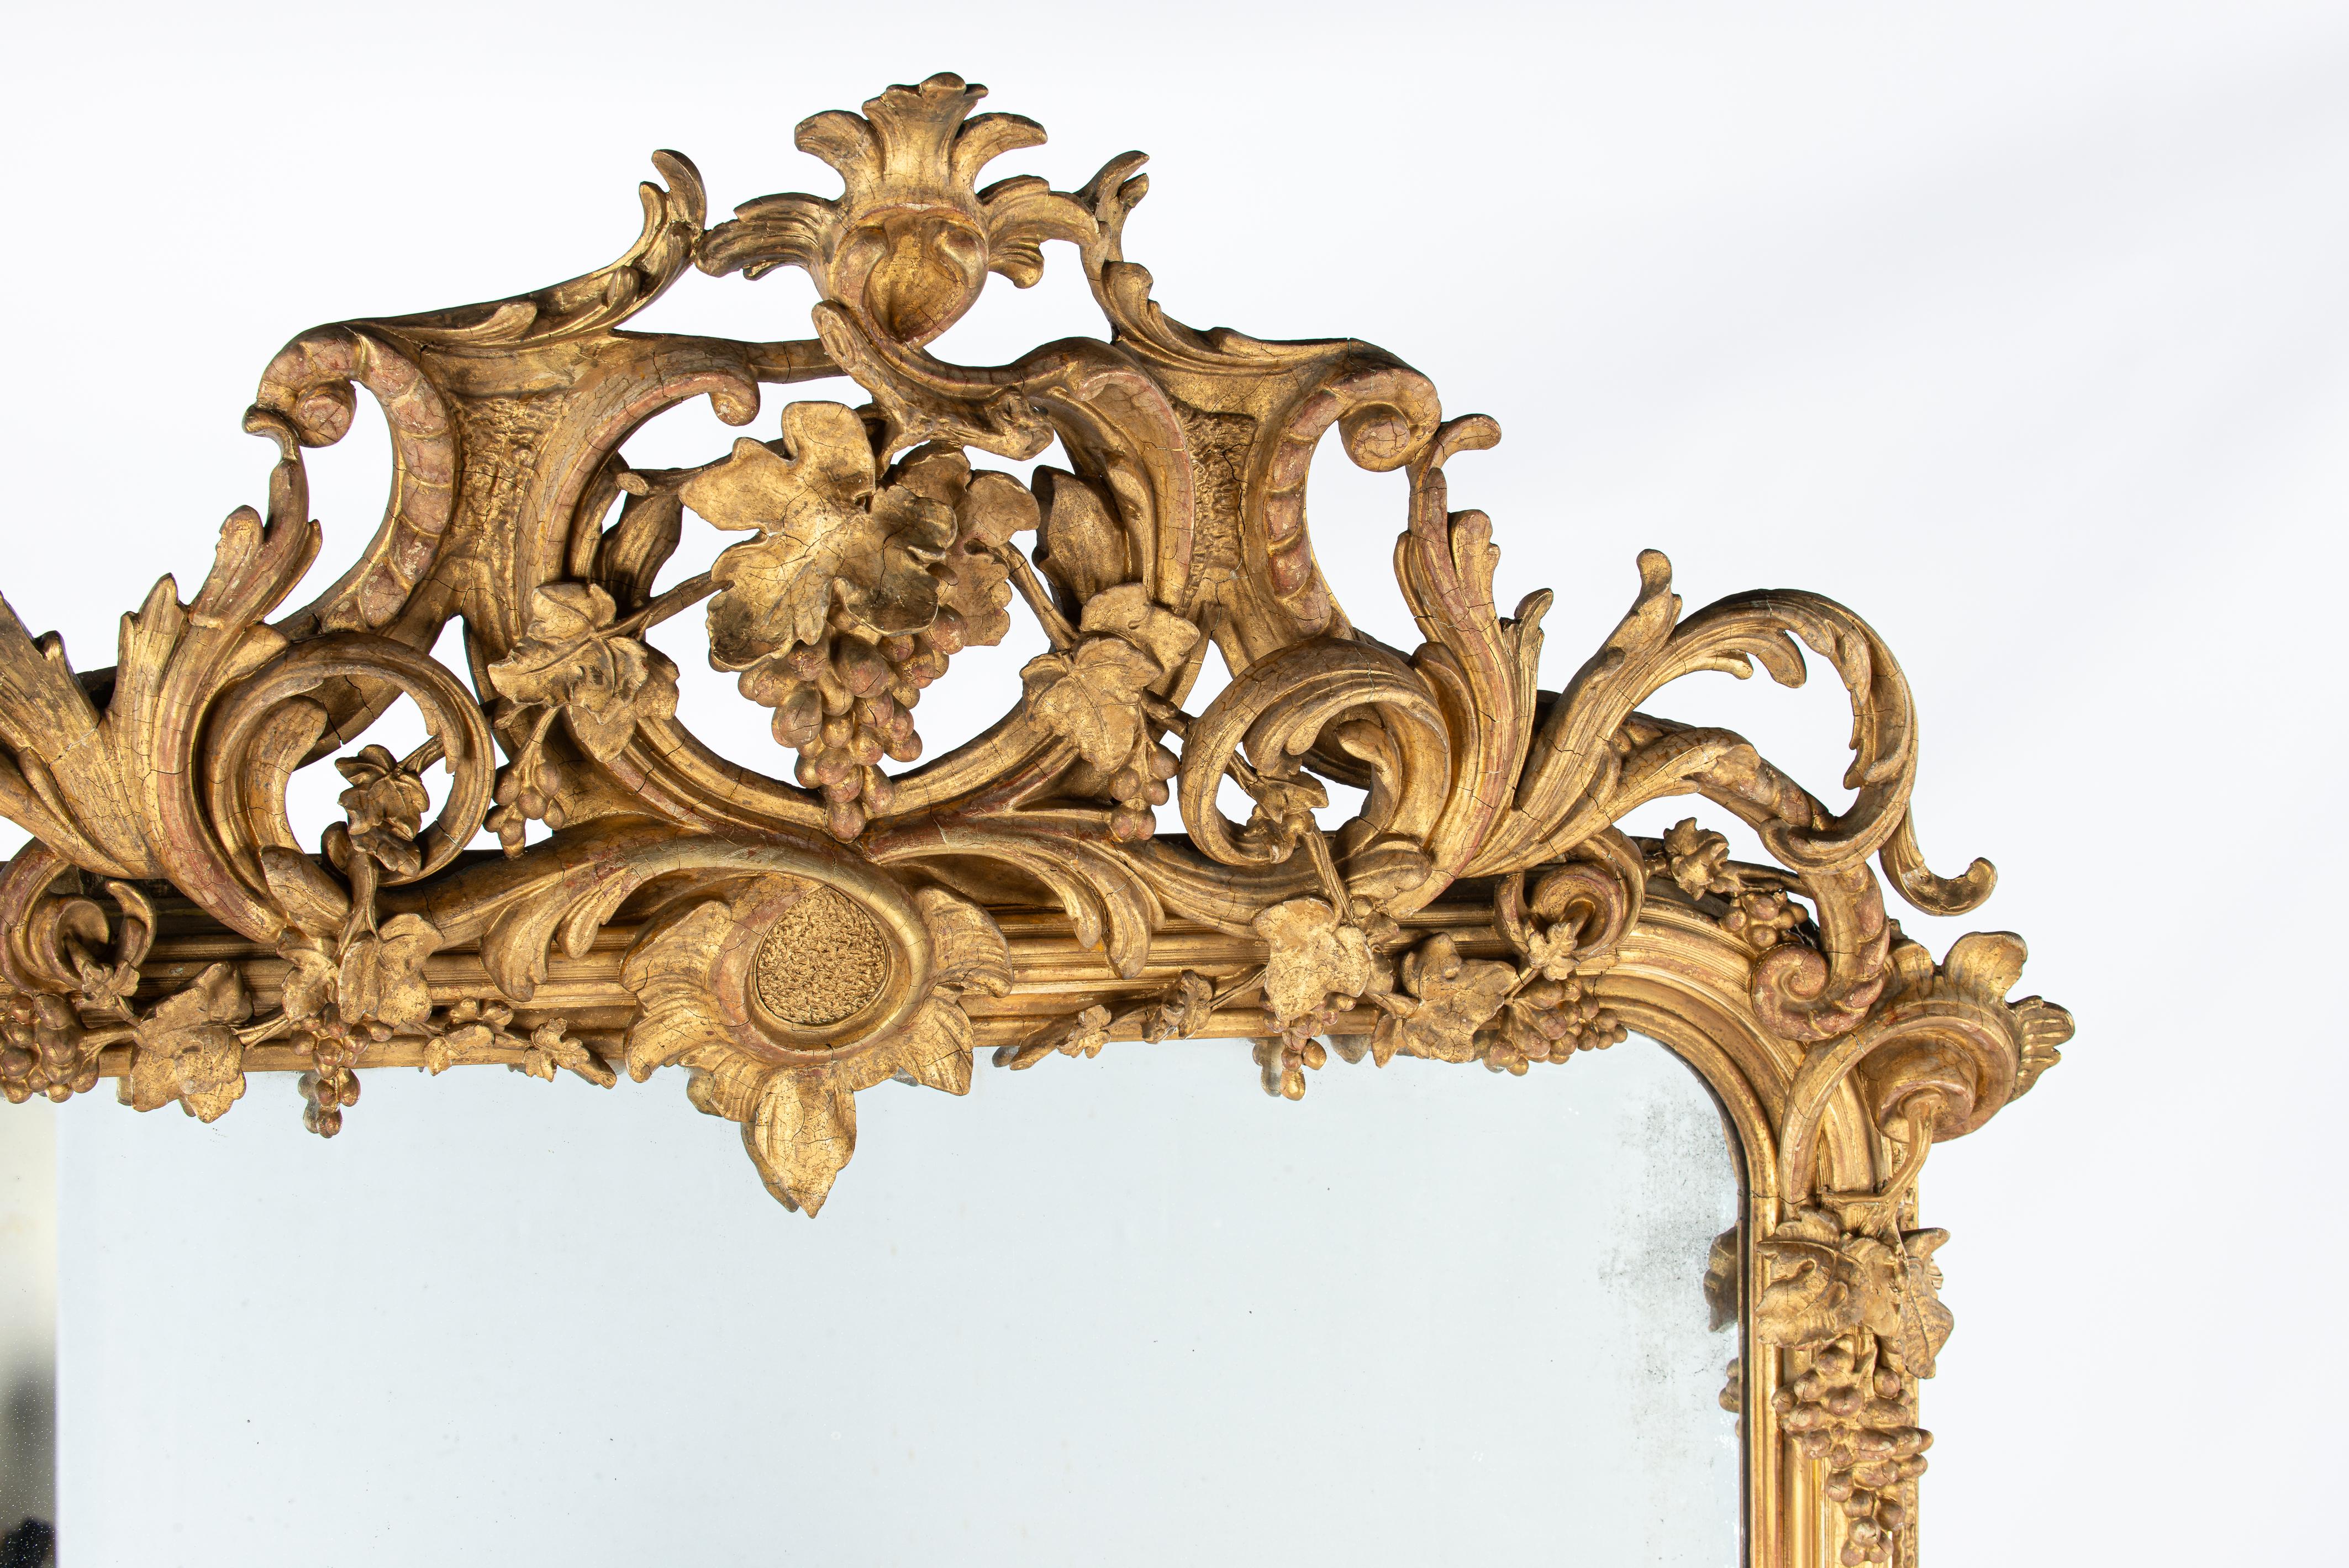 This monumental and richly ornamented mirror was crafted in southern France in the early 19th century, around 1830. The mirror frame features the characteristic rounded top corners typical of the Louis Philippe style. The exceptionally lavish crown